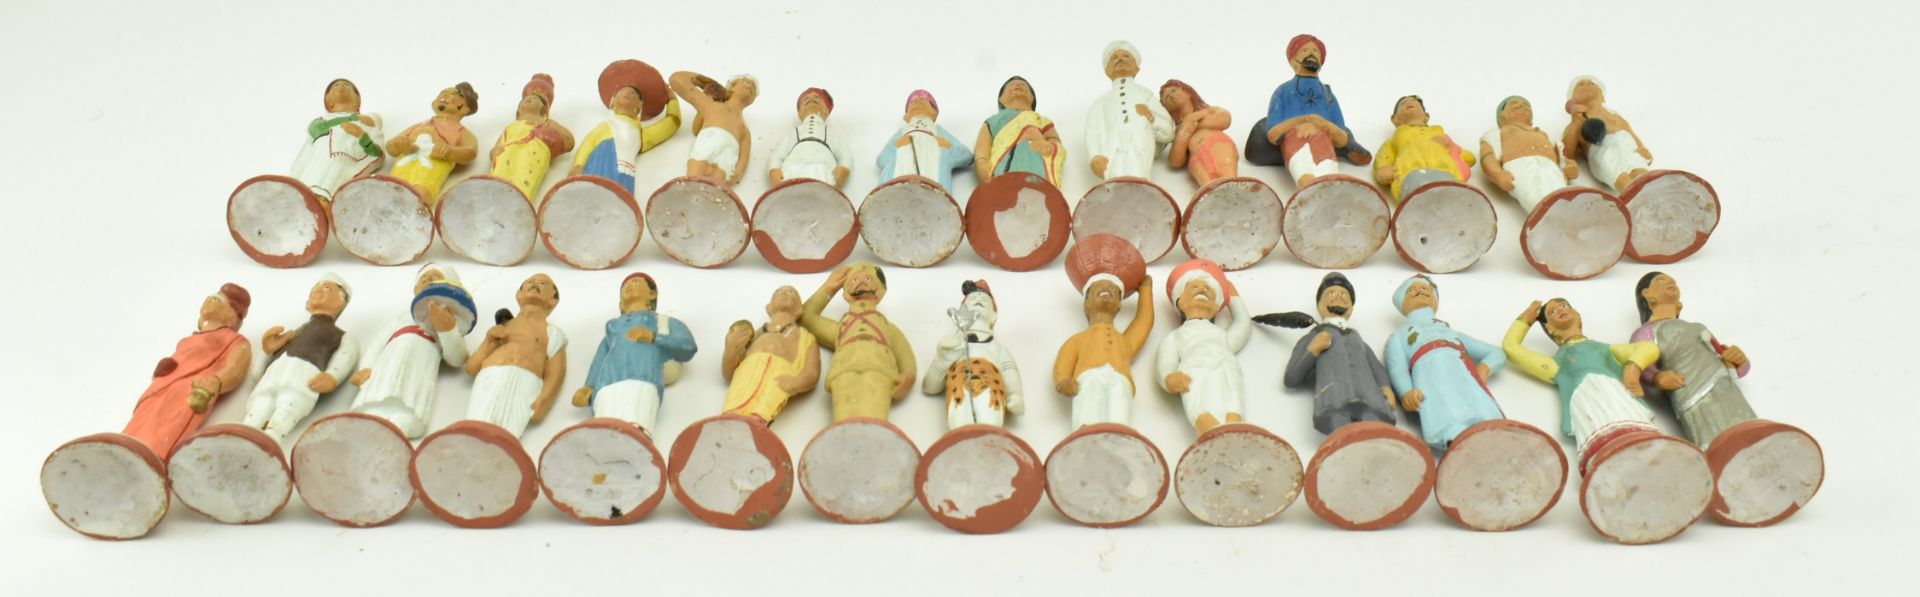 COLLECTION OF 28 INDIAN CLAY TERRACOTTA OVER WIRE FIGURINES - Image 6 of 6